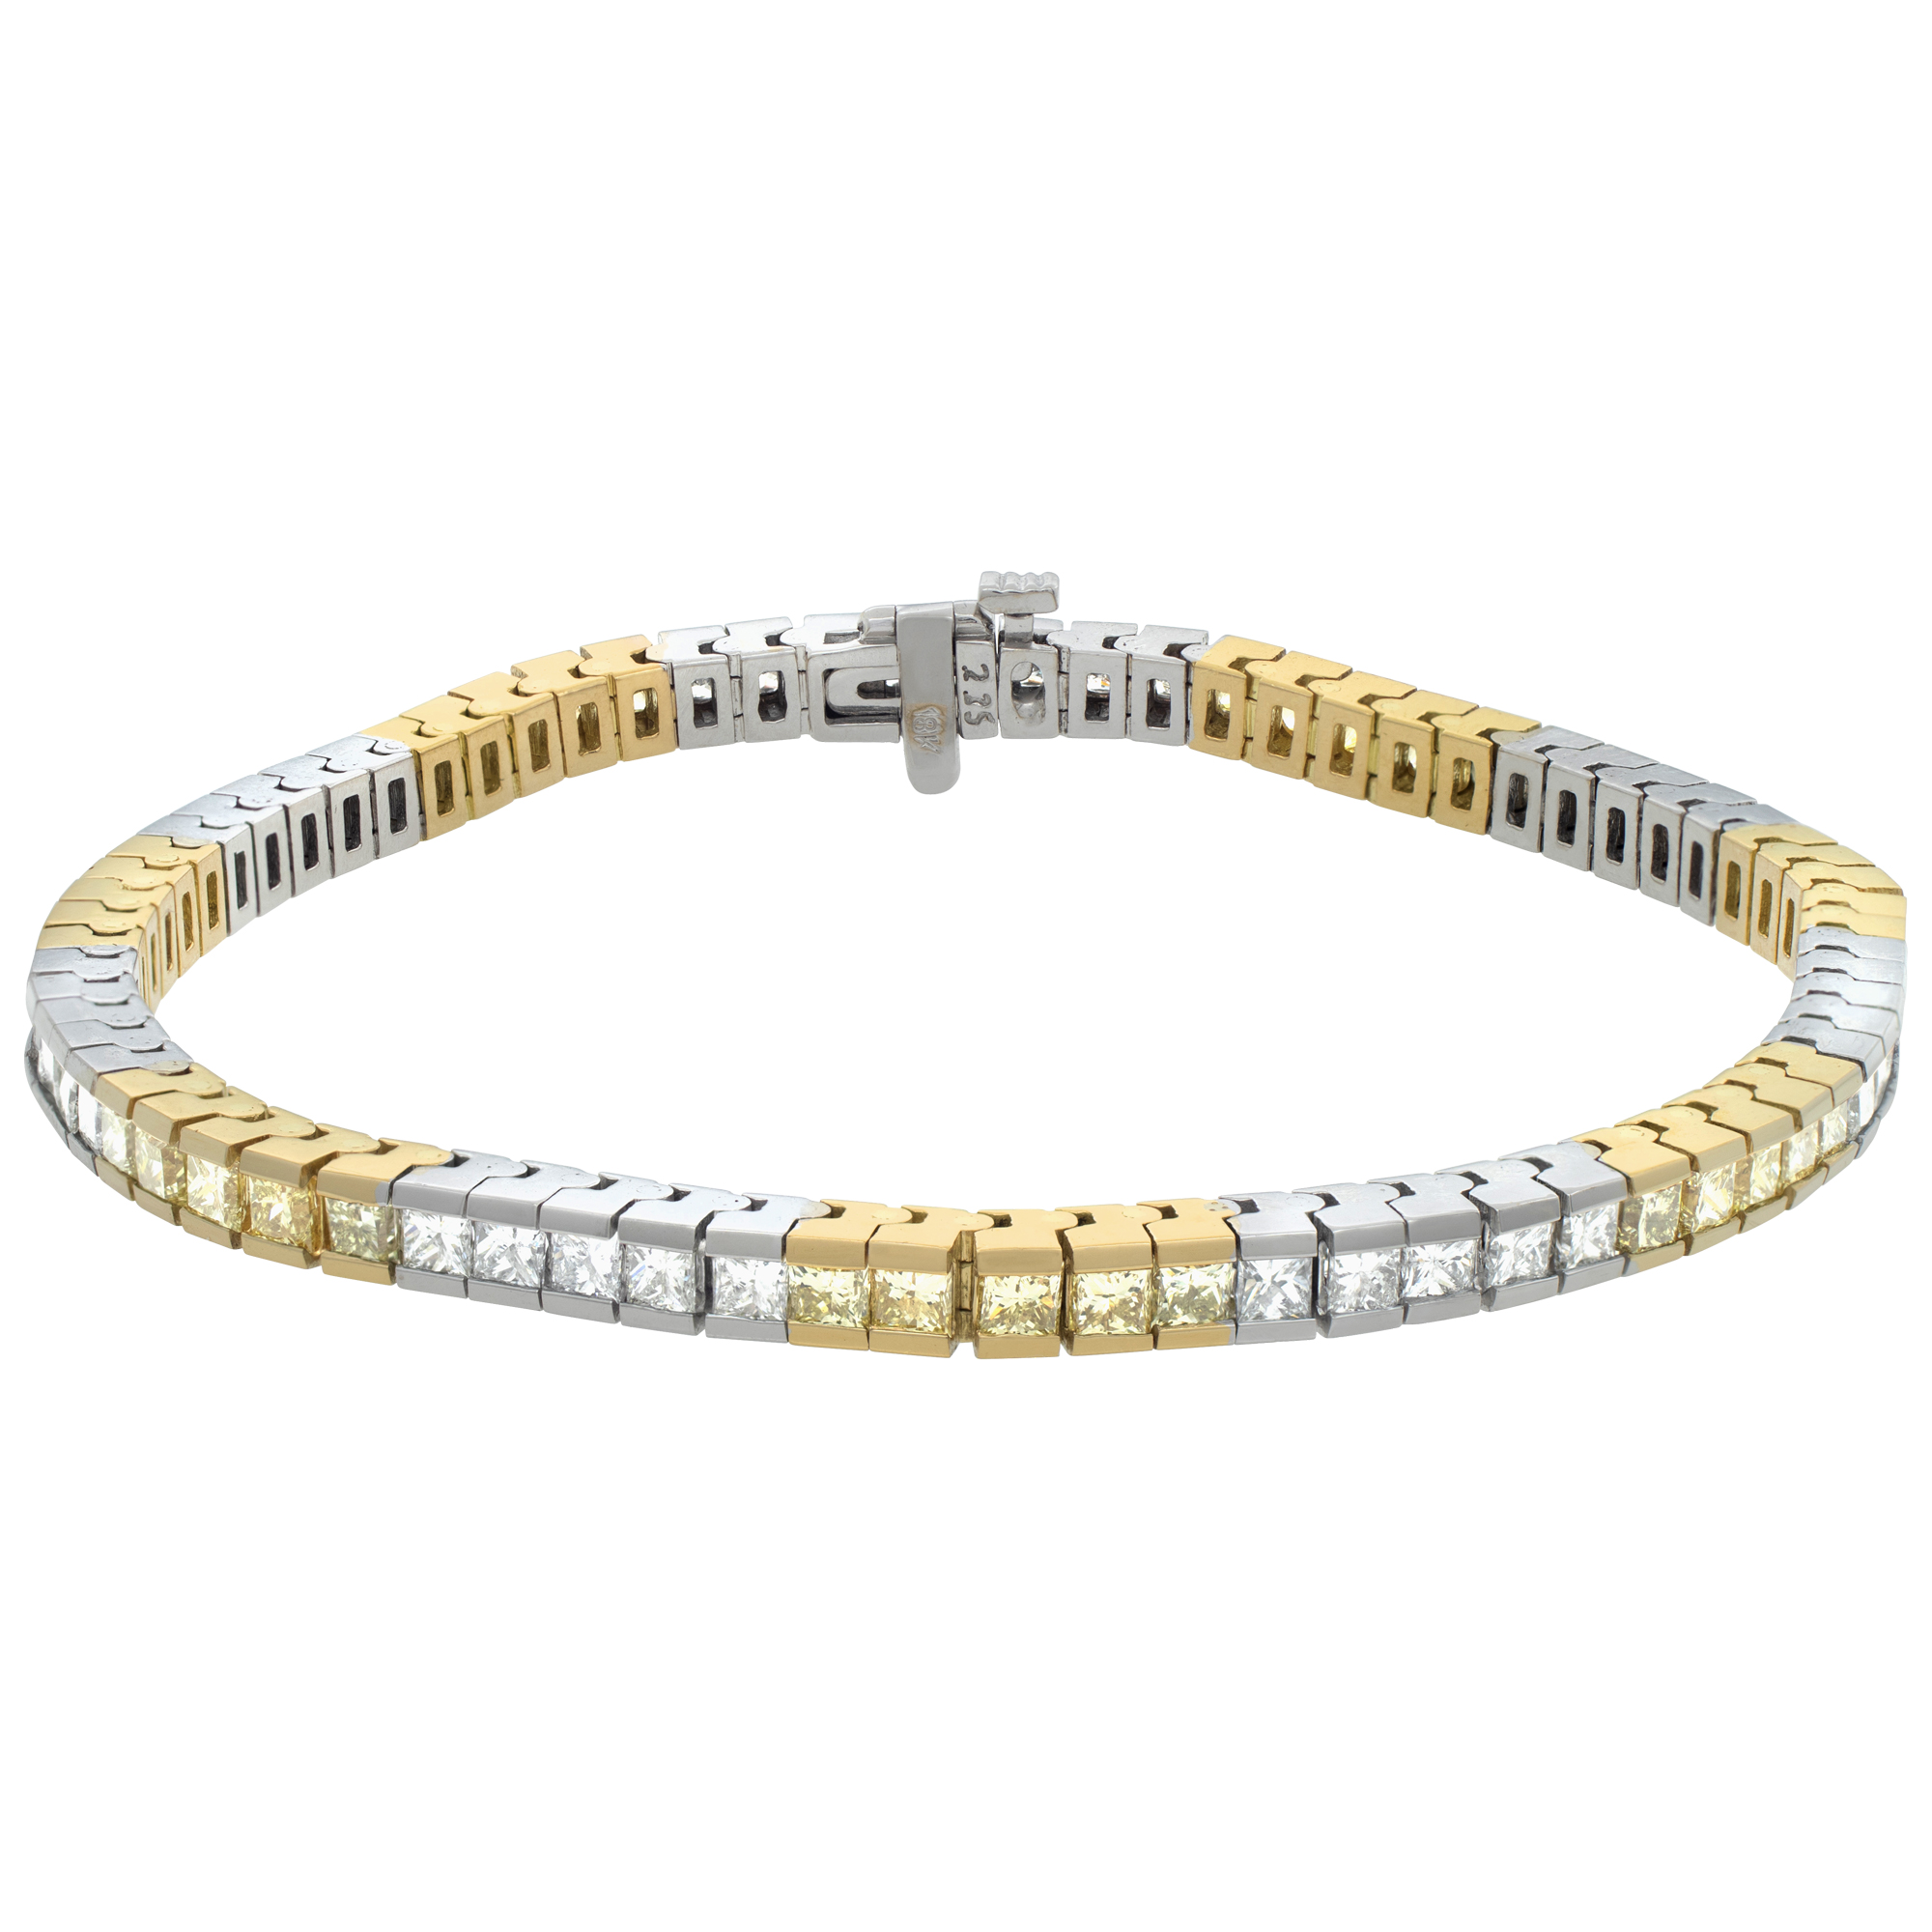 18k white and yelllow gold bracelet with white and yellow diamonds. (Stones)